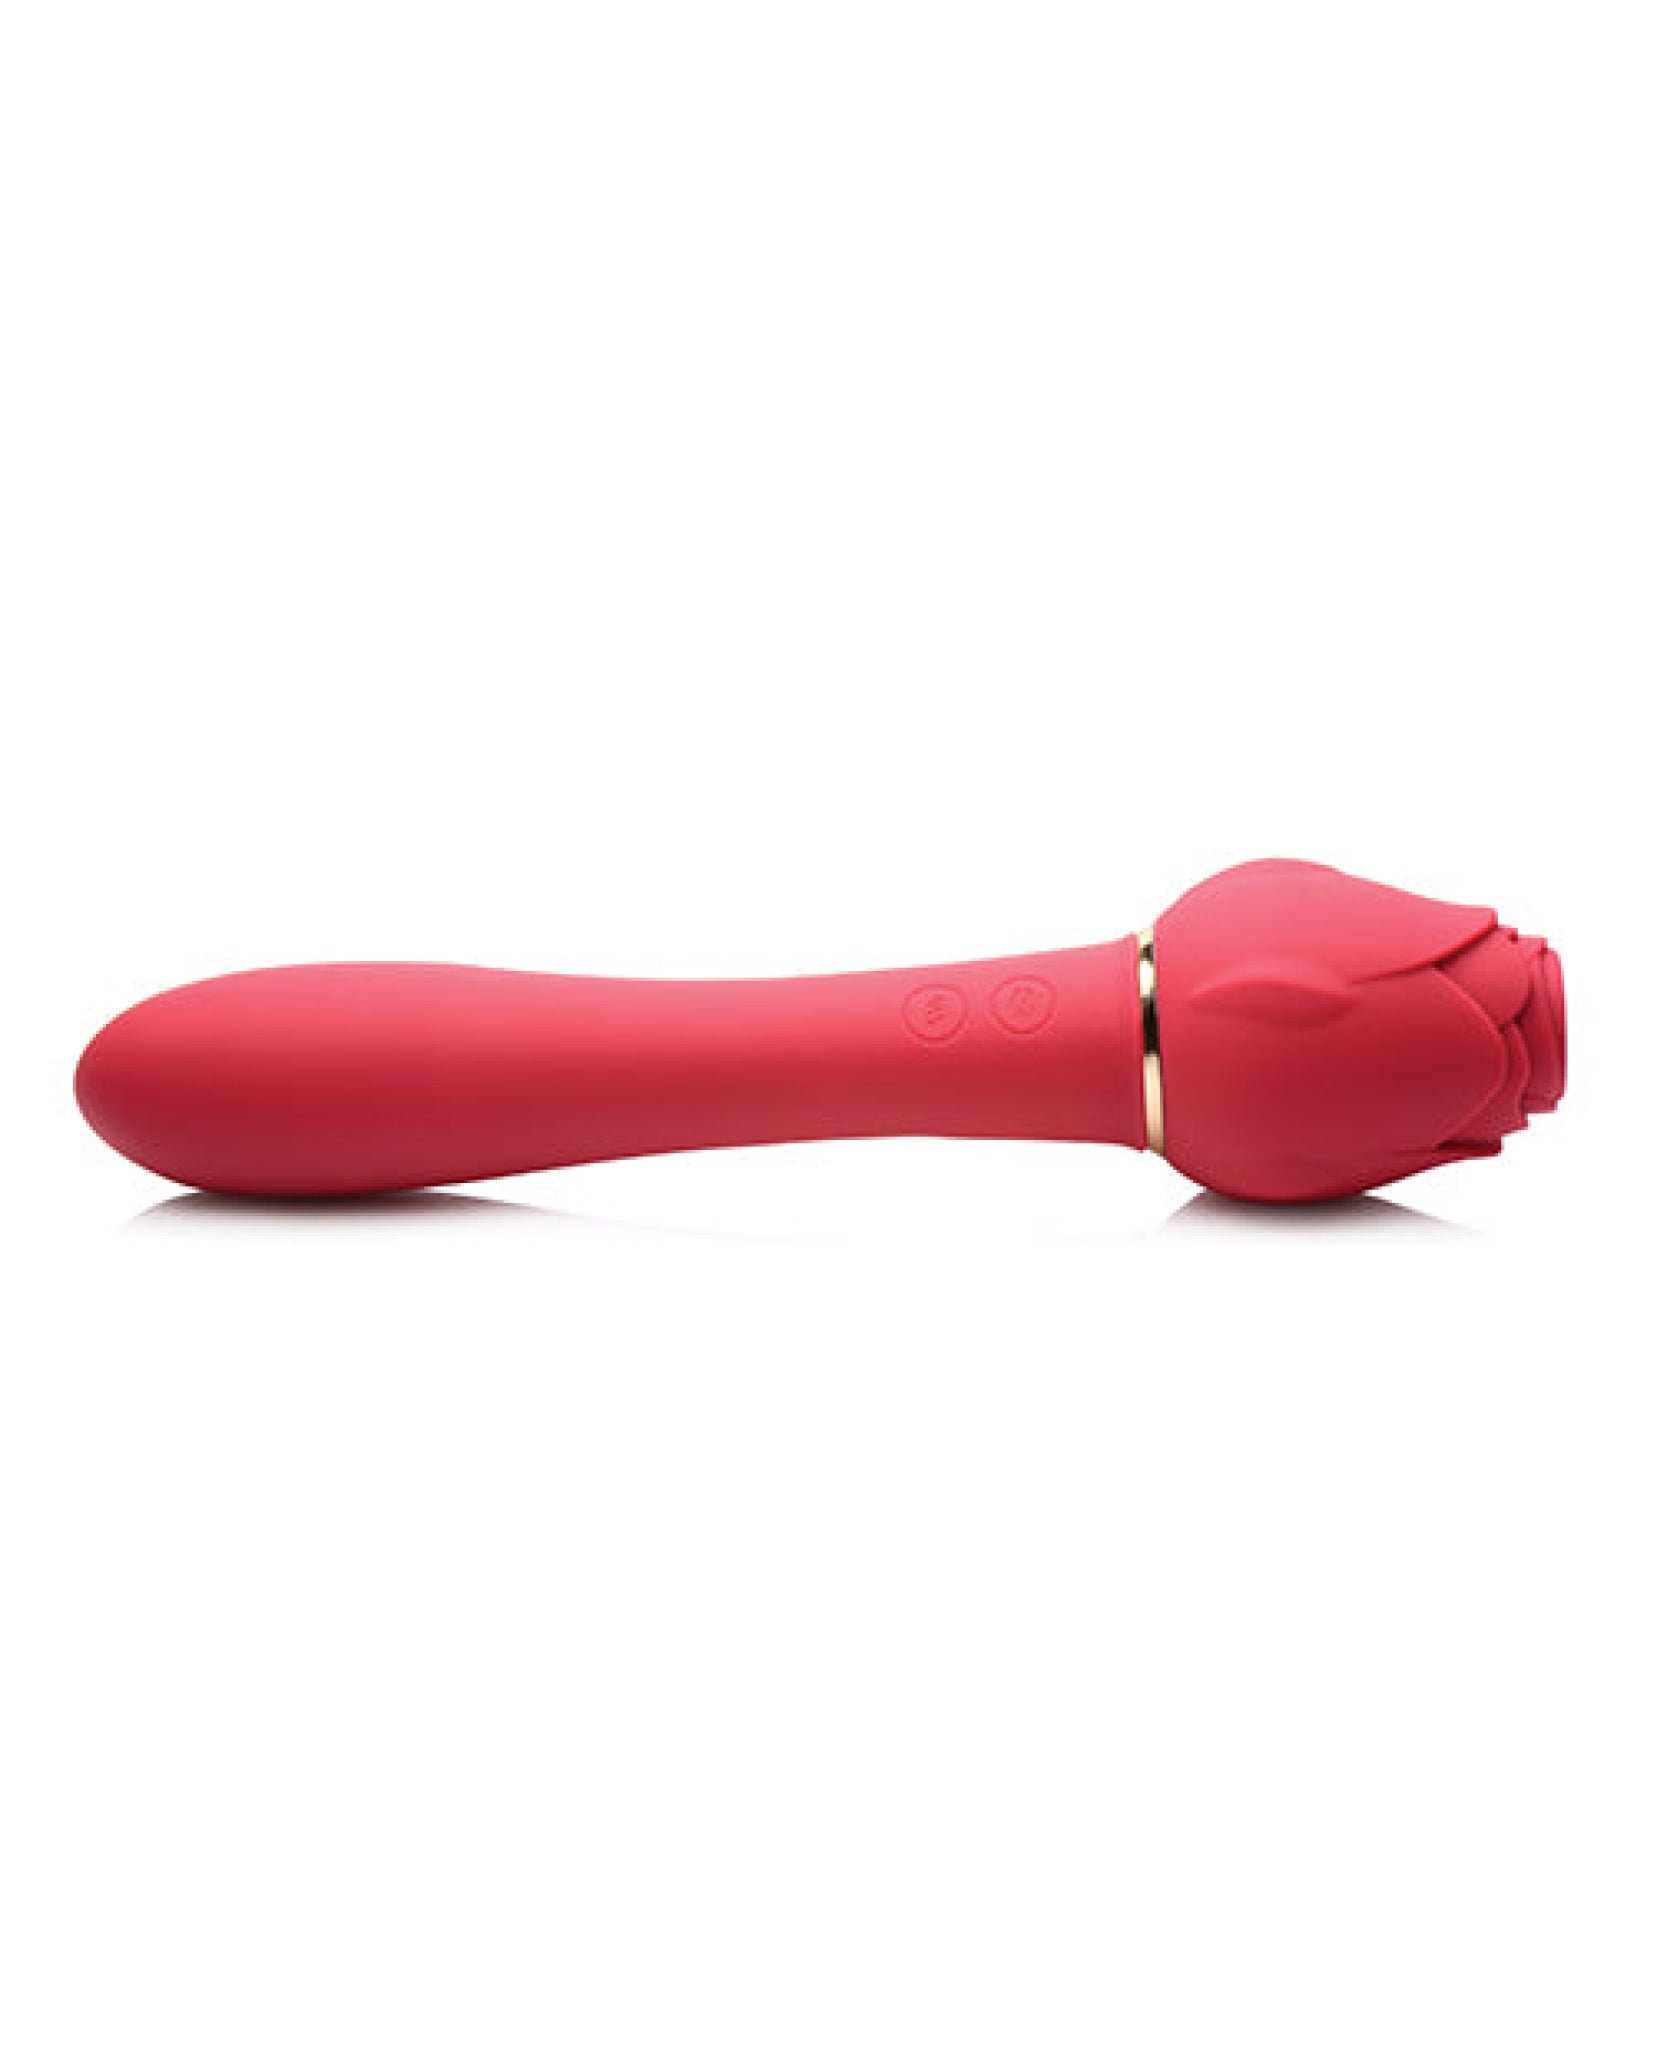 Inmi Bloomgasm Sweet Heart Rose 5x Suction Rose & 10x Vibrator - Red Inmi